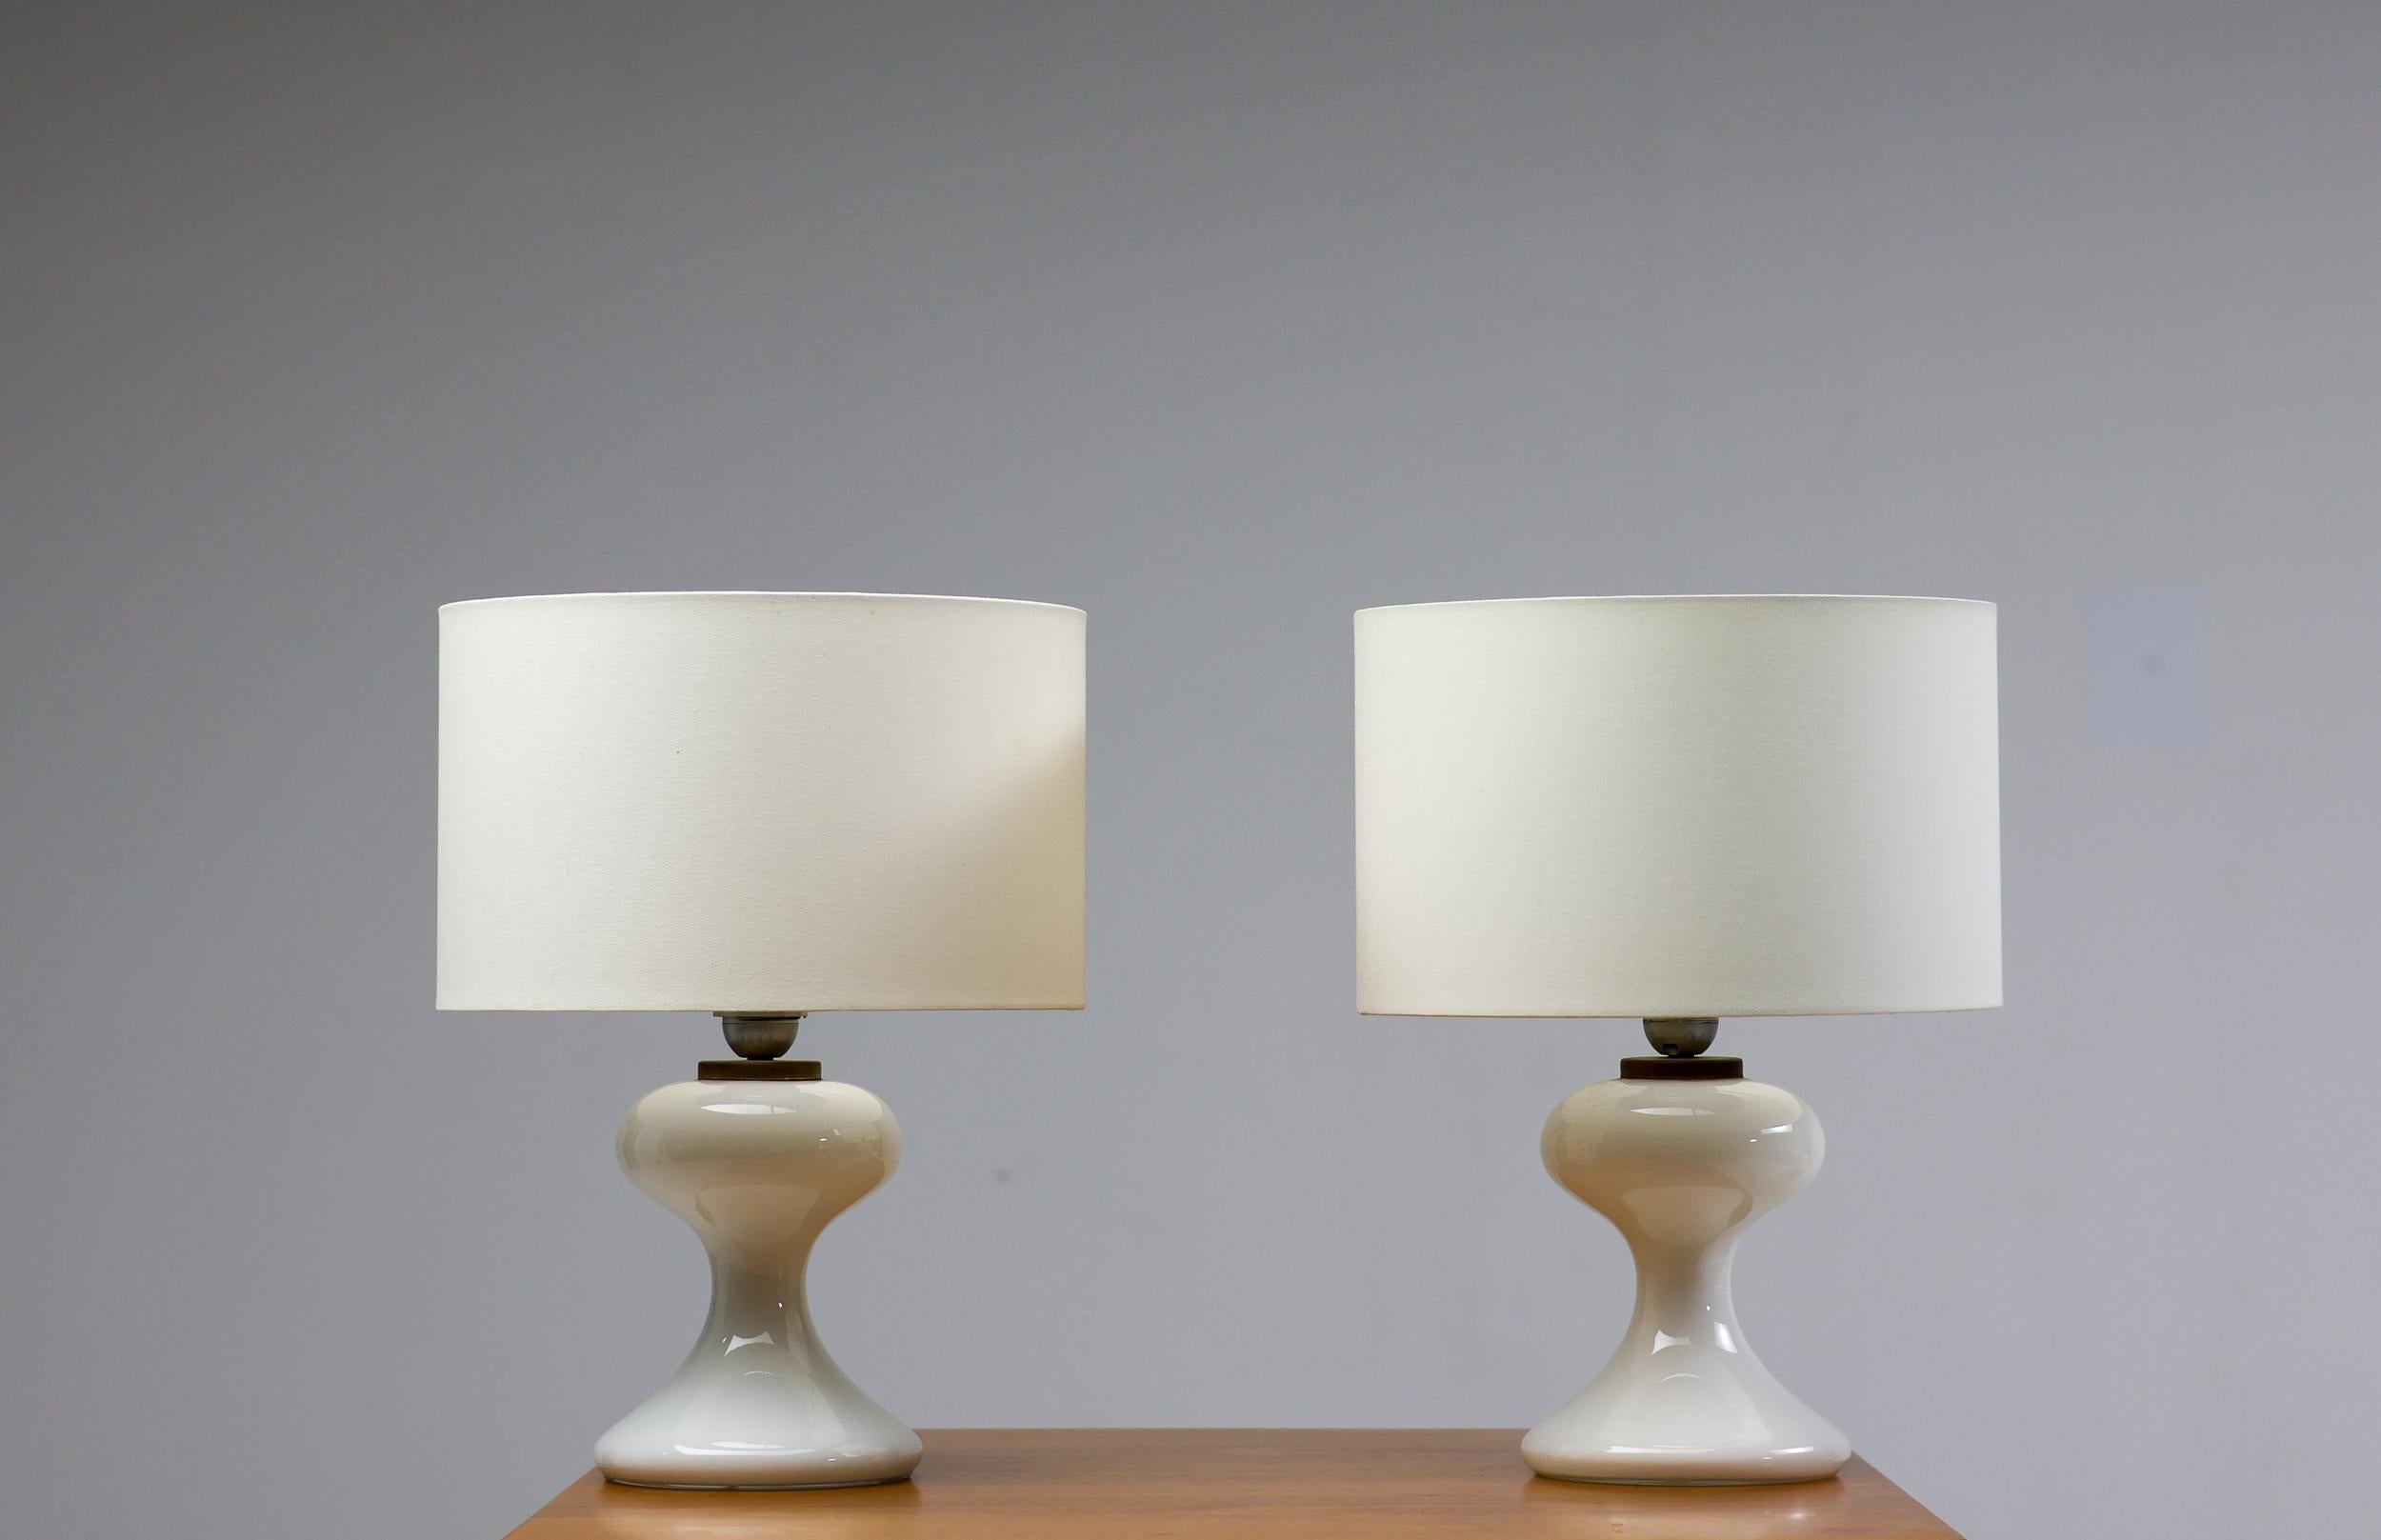 Great pair of white hand-blown glass table lamps with a white linen shade designed in 1968 by Ingo Maurer for his company M-Design. Very elegant design that gives a warm atmosphere to a room despite the strict modern appearance.
Unique opportunity